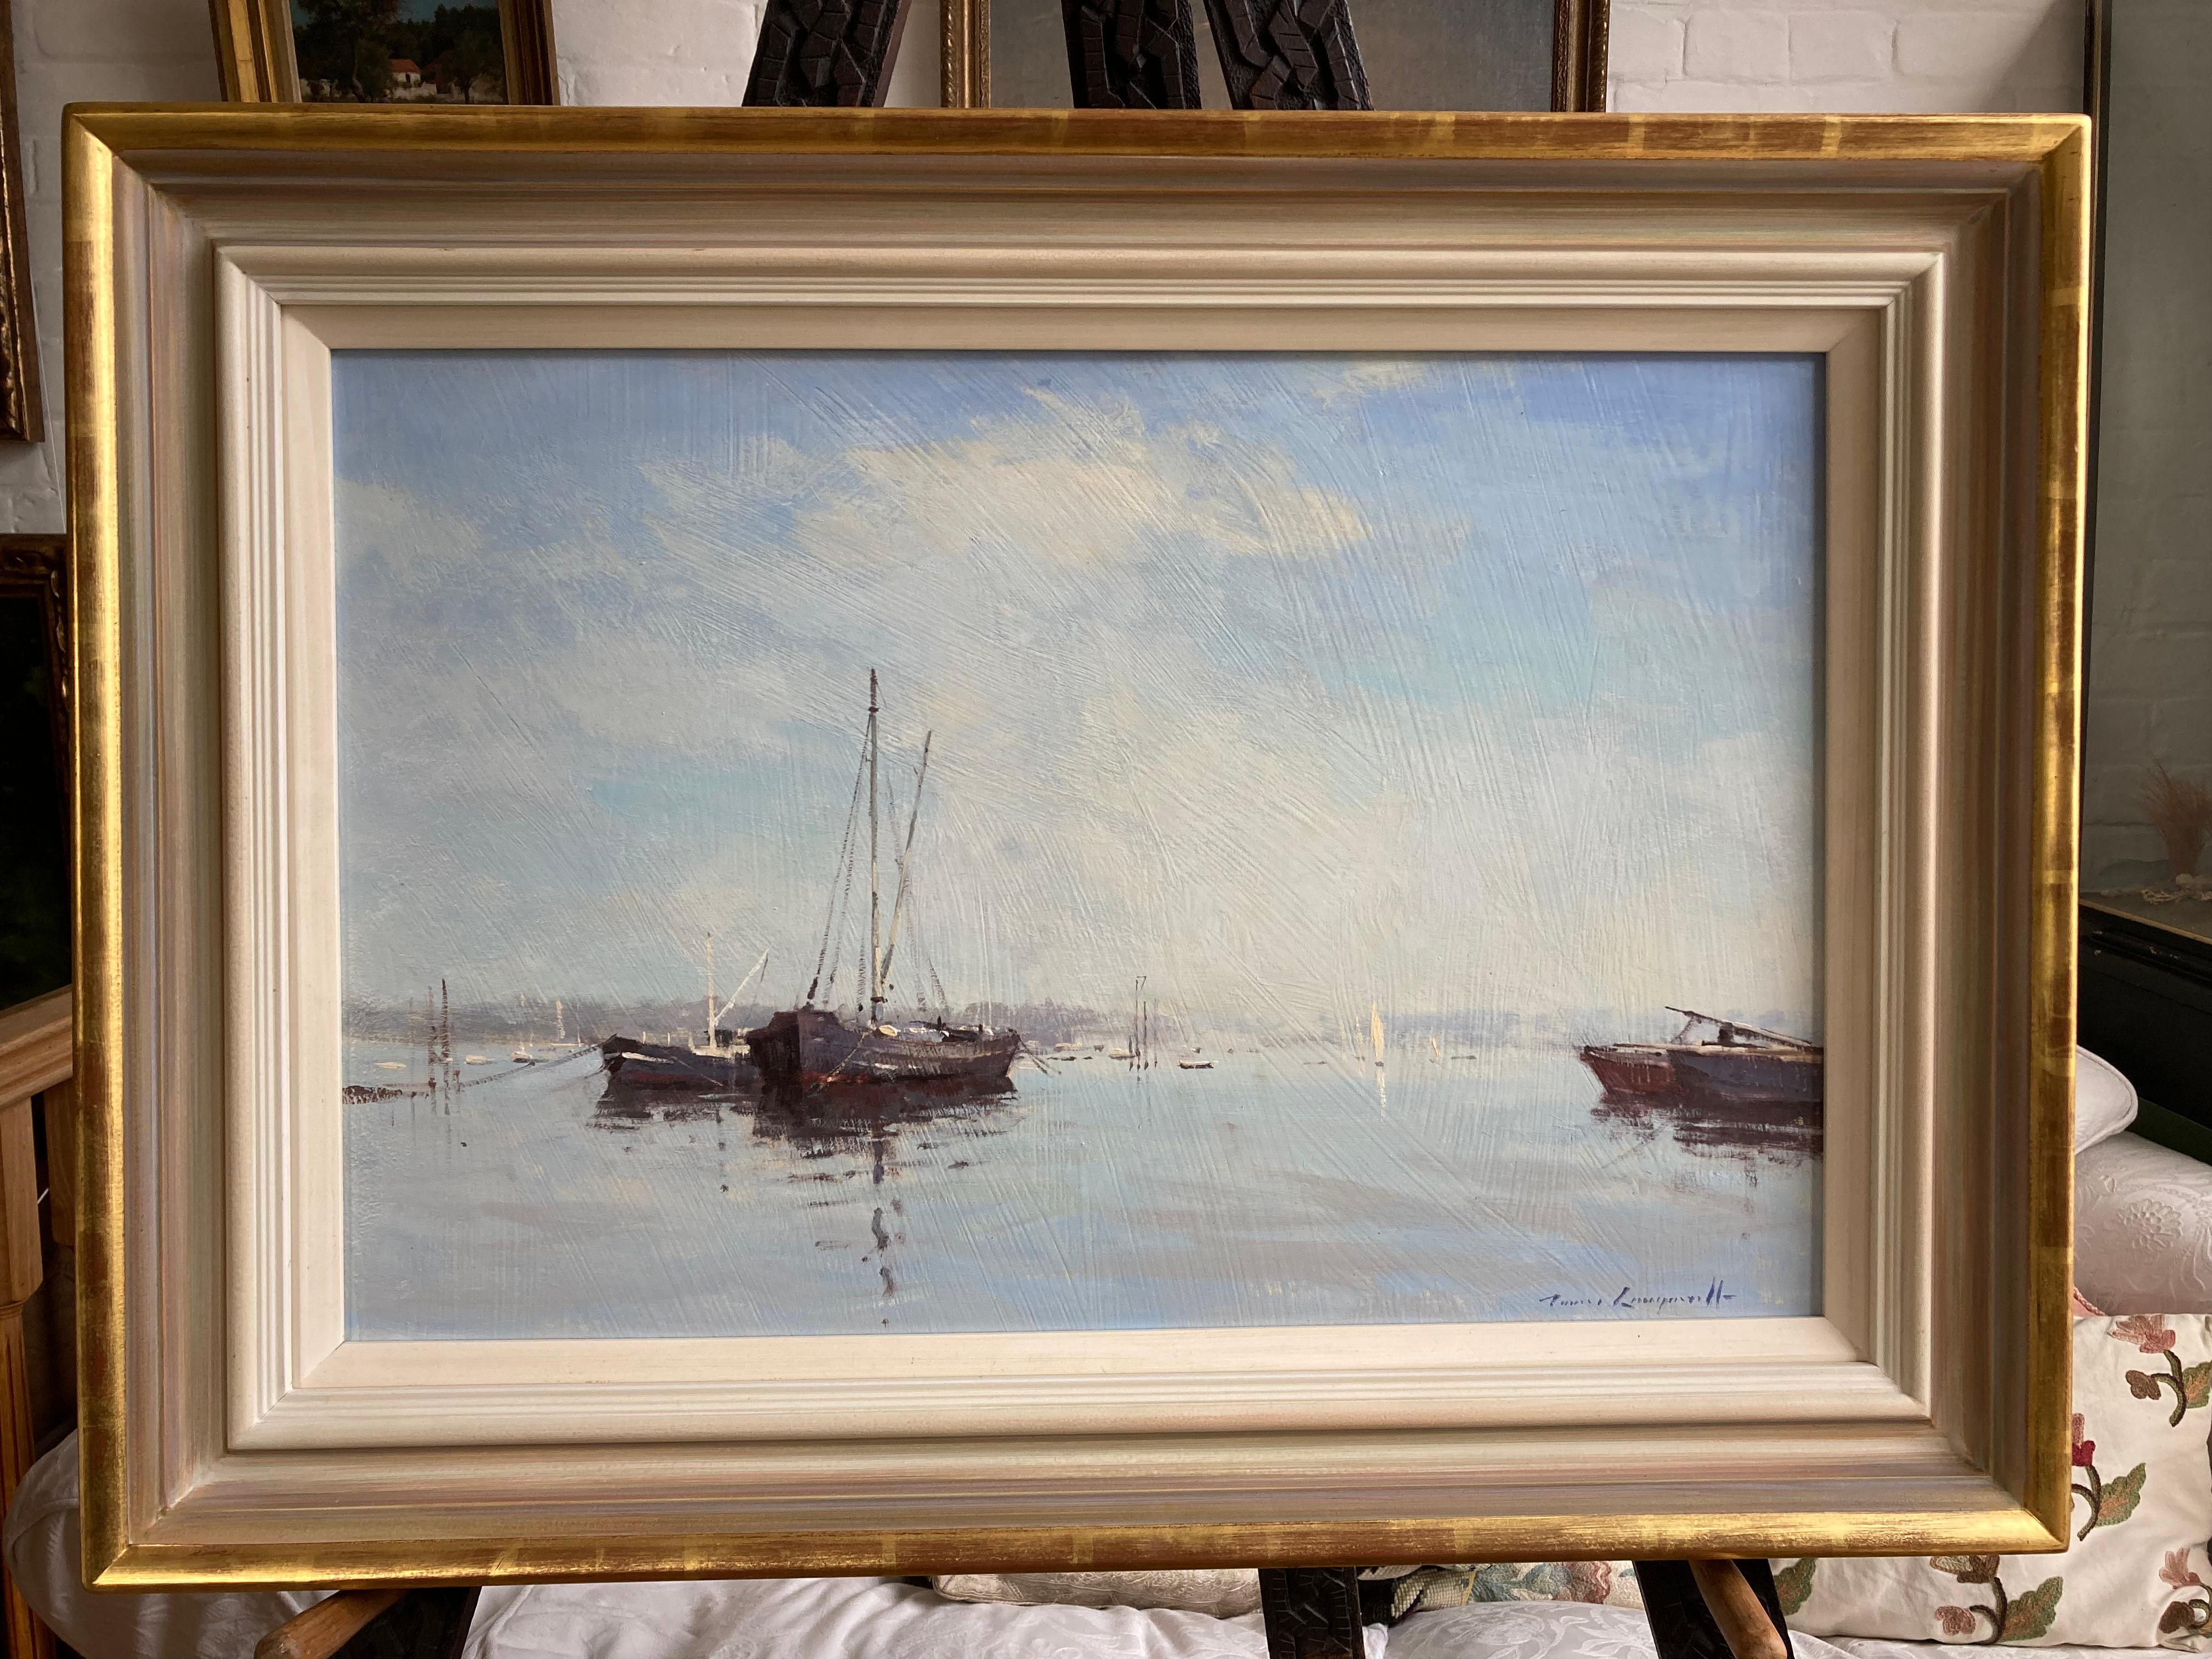 James Longueville, River Orwell with sailing boats For Sale 2